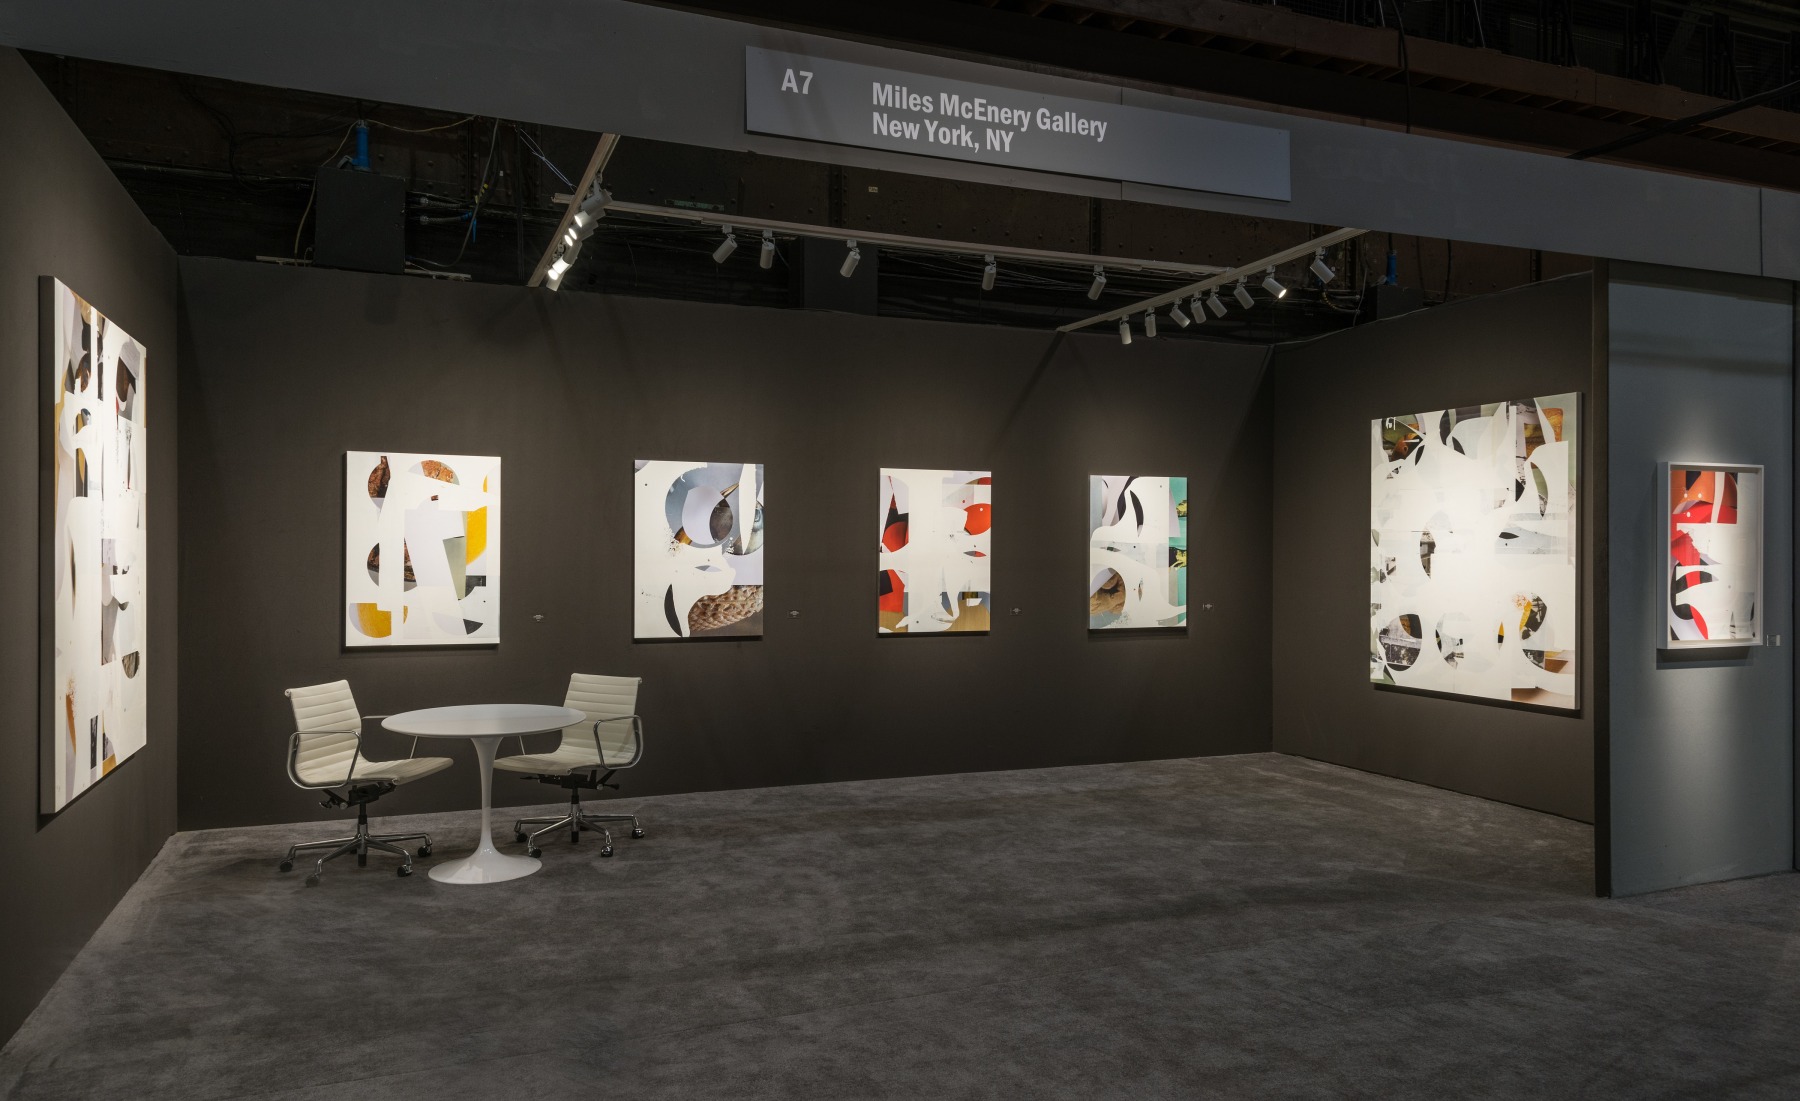 ADAA THE ART SHOW - BOOTH #A7 - News - MILES McENERY GALLERY